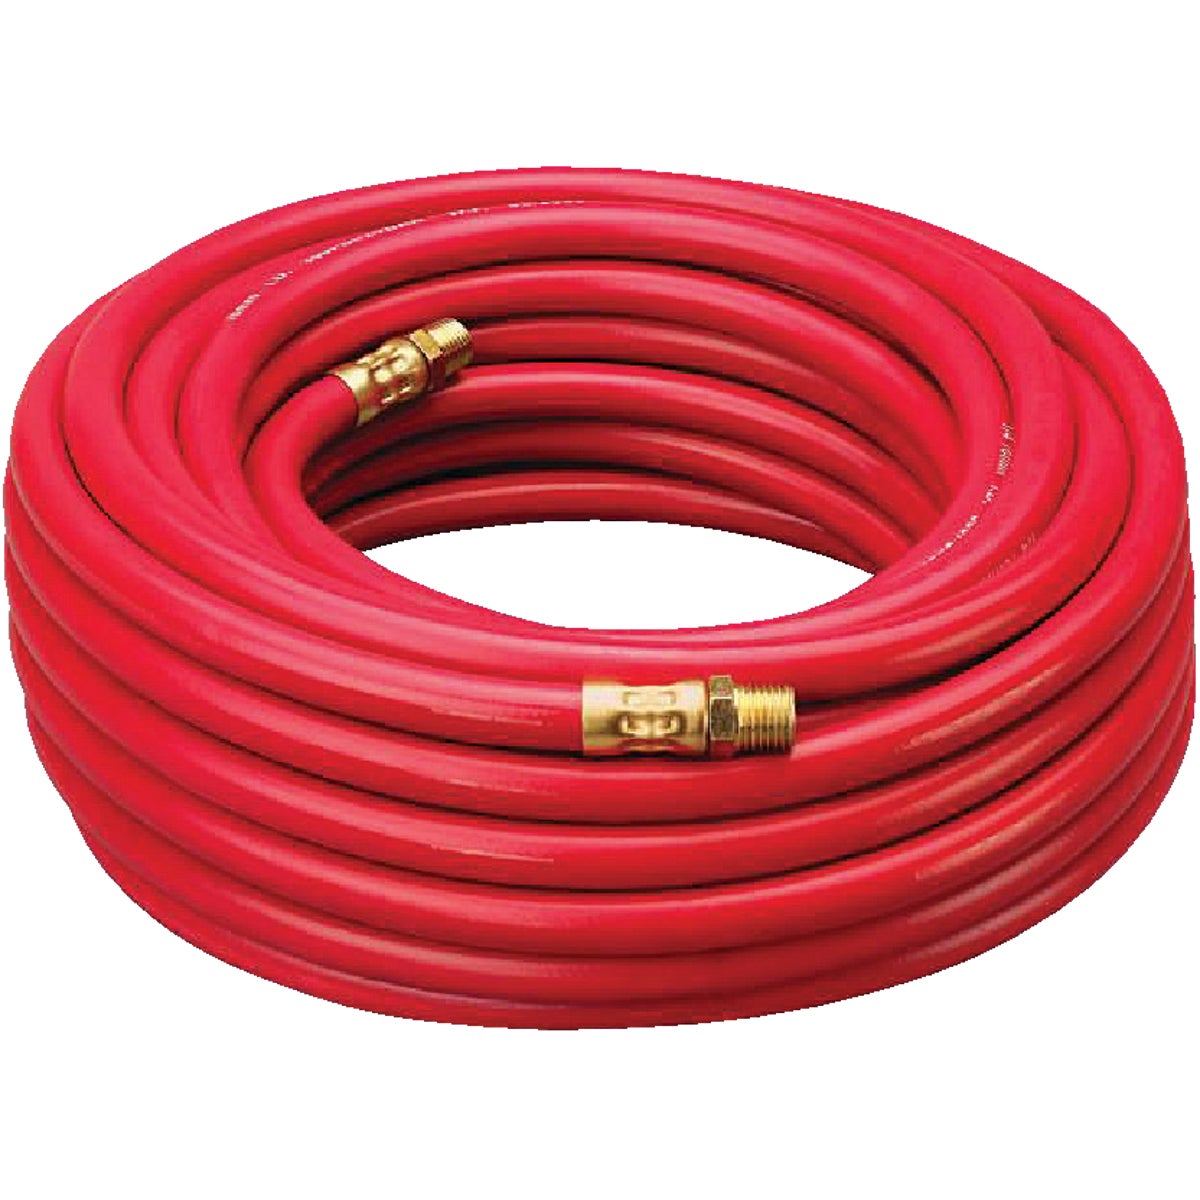 Amflo 1/4 In. x 50 Ft. Rubber Air Hose